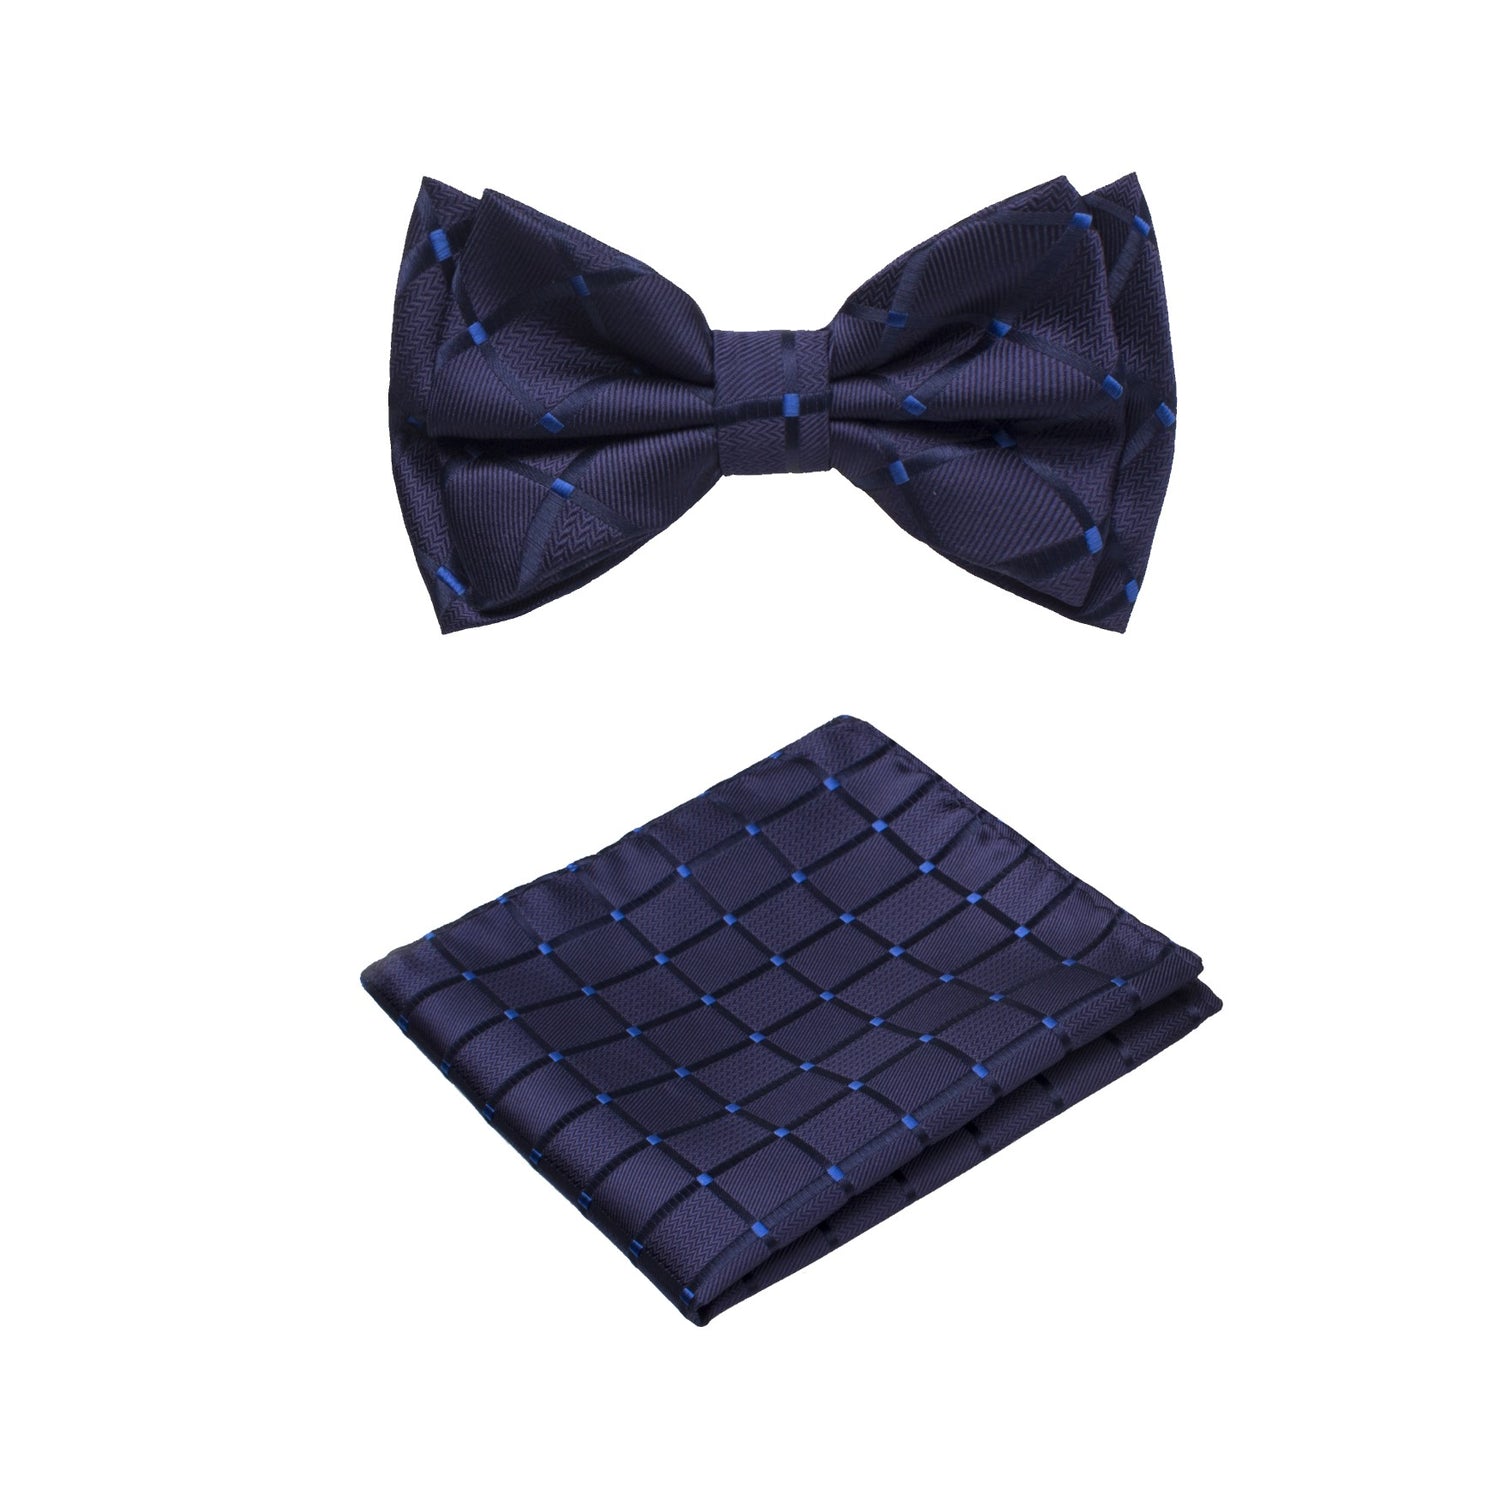 Main View: A Dark Blue With Geometric Check Texture Pattern Silk Kids Pre-Tied Bow Tie, Matching Pocket Square